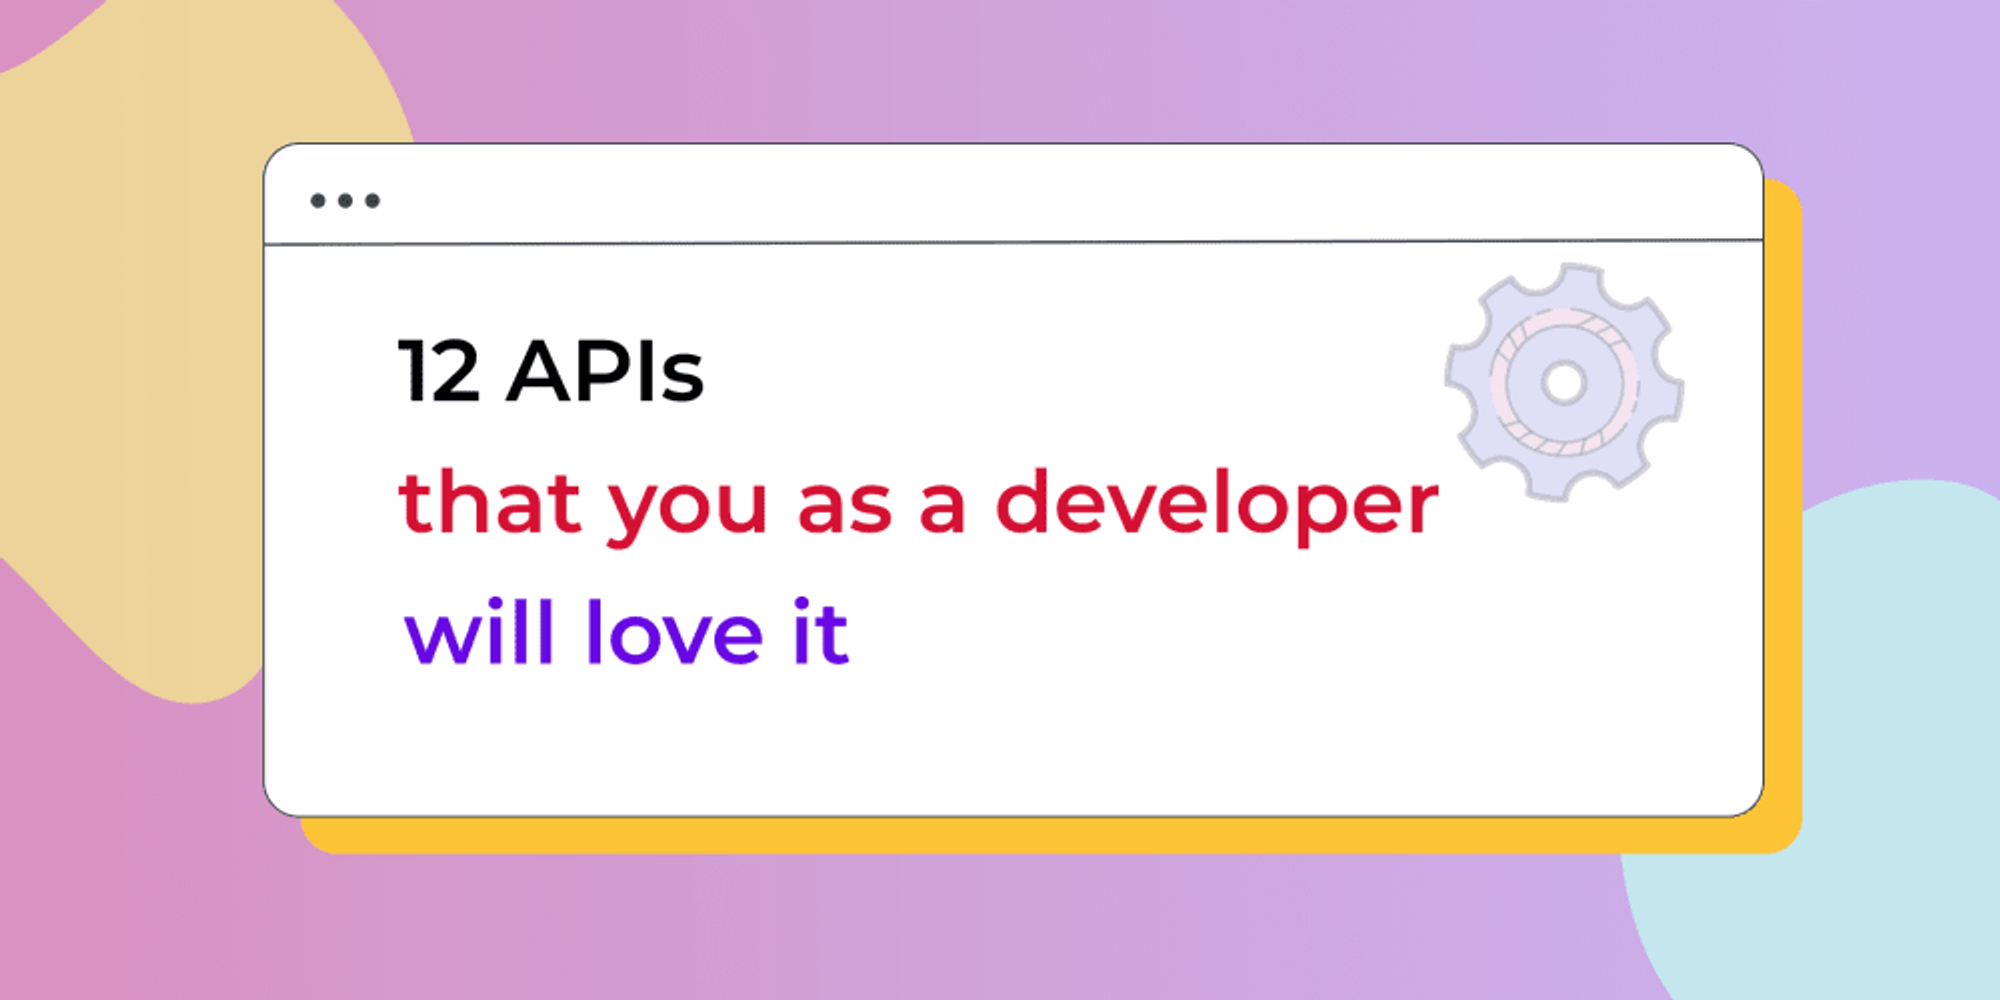 12 APIs that you as a developer will love it 💖